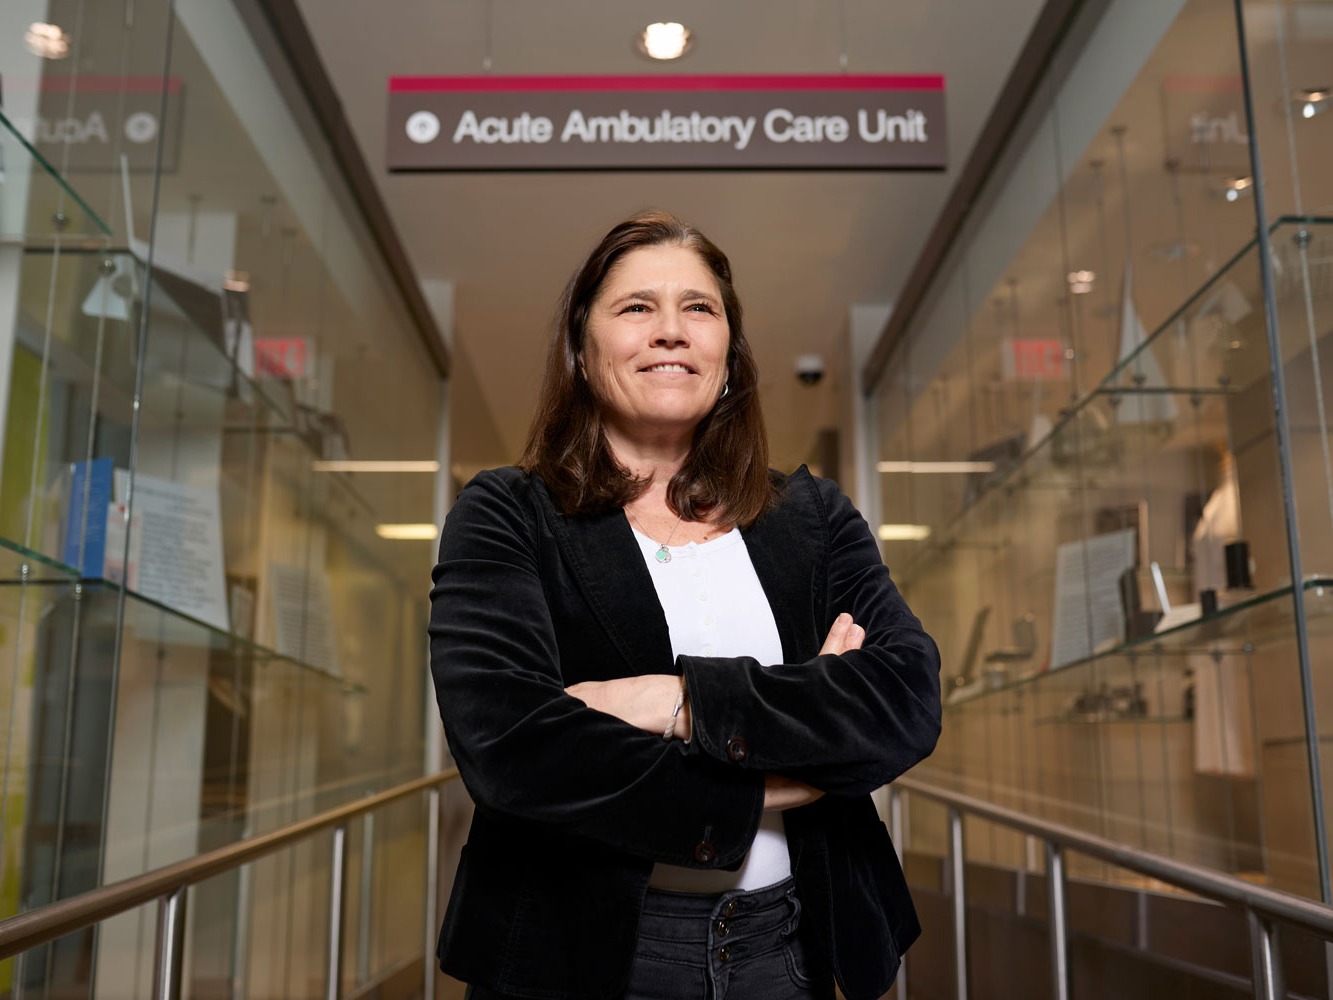 Janis MacDonald standing in front of the Acute Ambulatory Acute Unit (AACU)